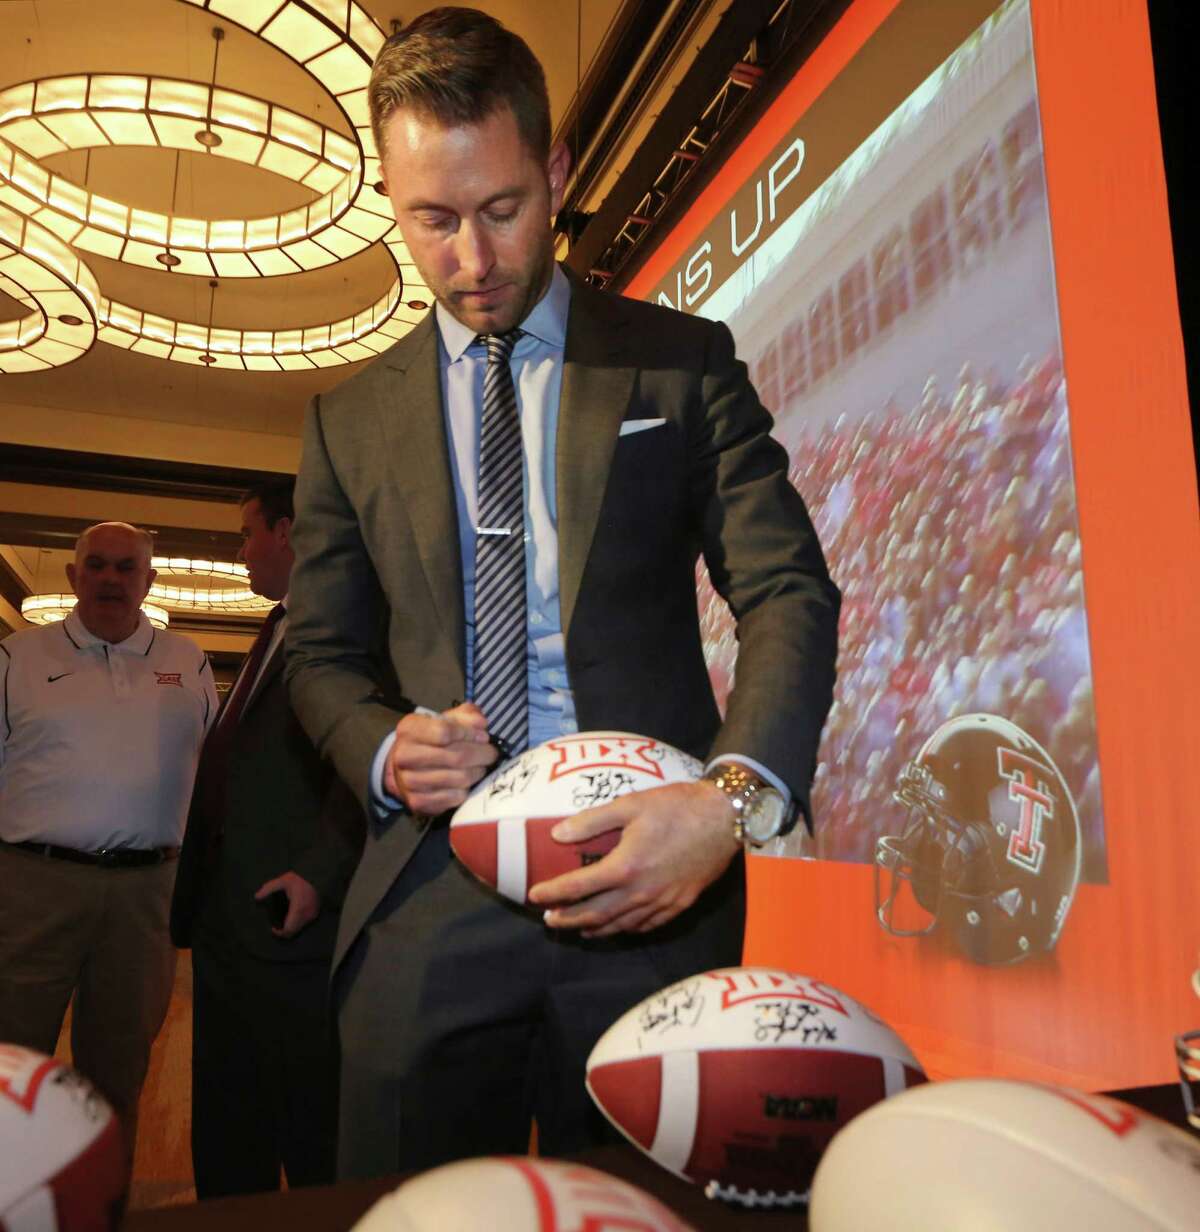 Proof the watch is fake ... Texas Tech football coach Kliff Kingsbury signs a football during the NCAA college Big 12 Conference football media days in Dallas, Monday, July 21, 2014. The watch seen on his wrist could be a $100 fake. (AP Photo/LM Otero)